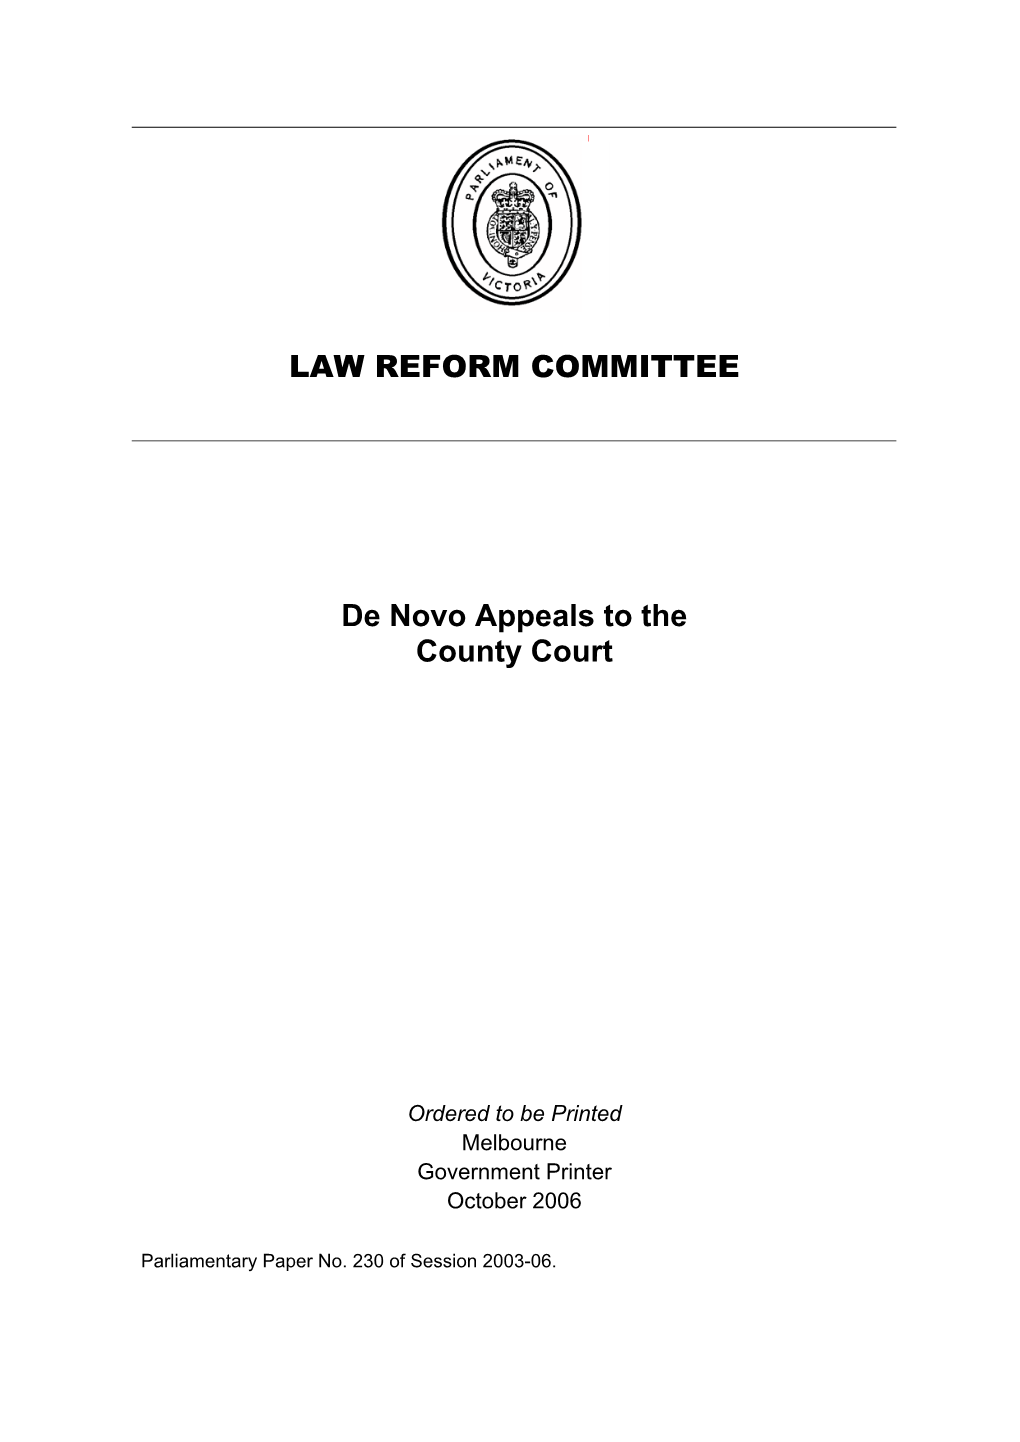 LAW REFORM COMMITTEE De Novo Appeals to the County Court